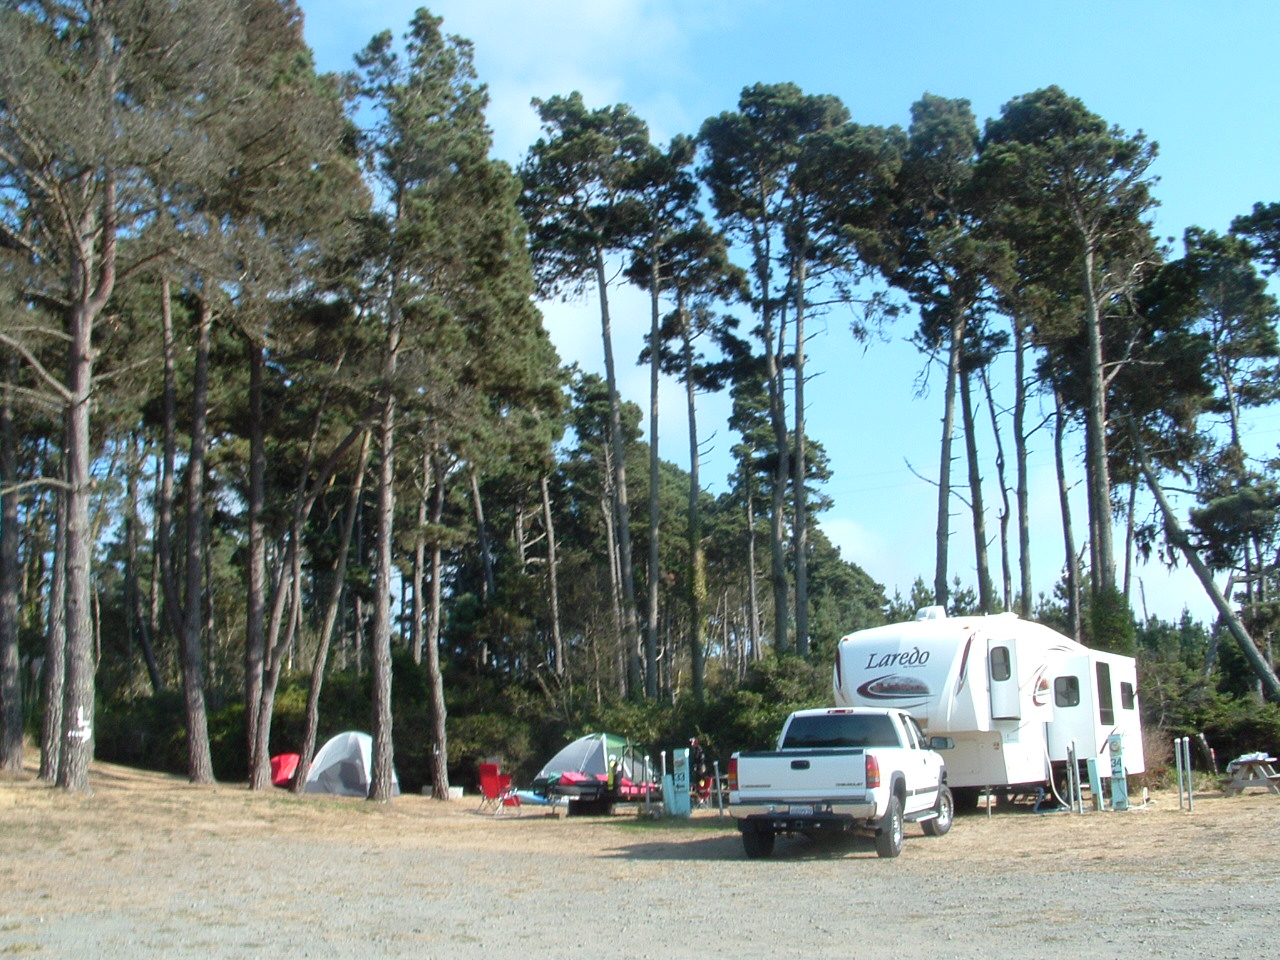 Hidden Pines RV Park Campground - Fort Bragg California : February 2013 Fort Bragg Rv Camping On The Beach